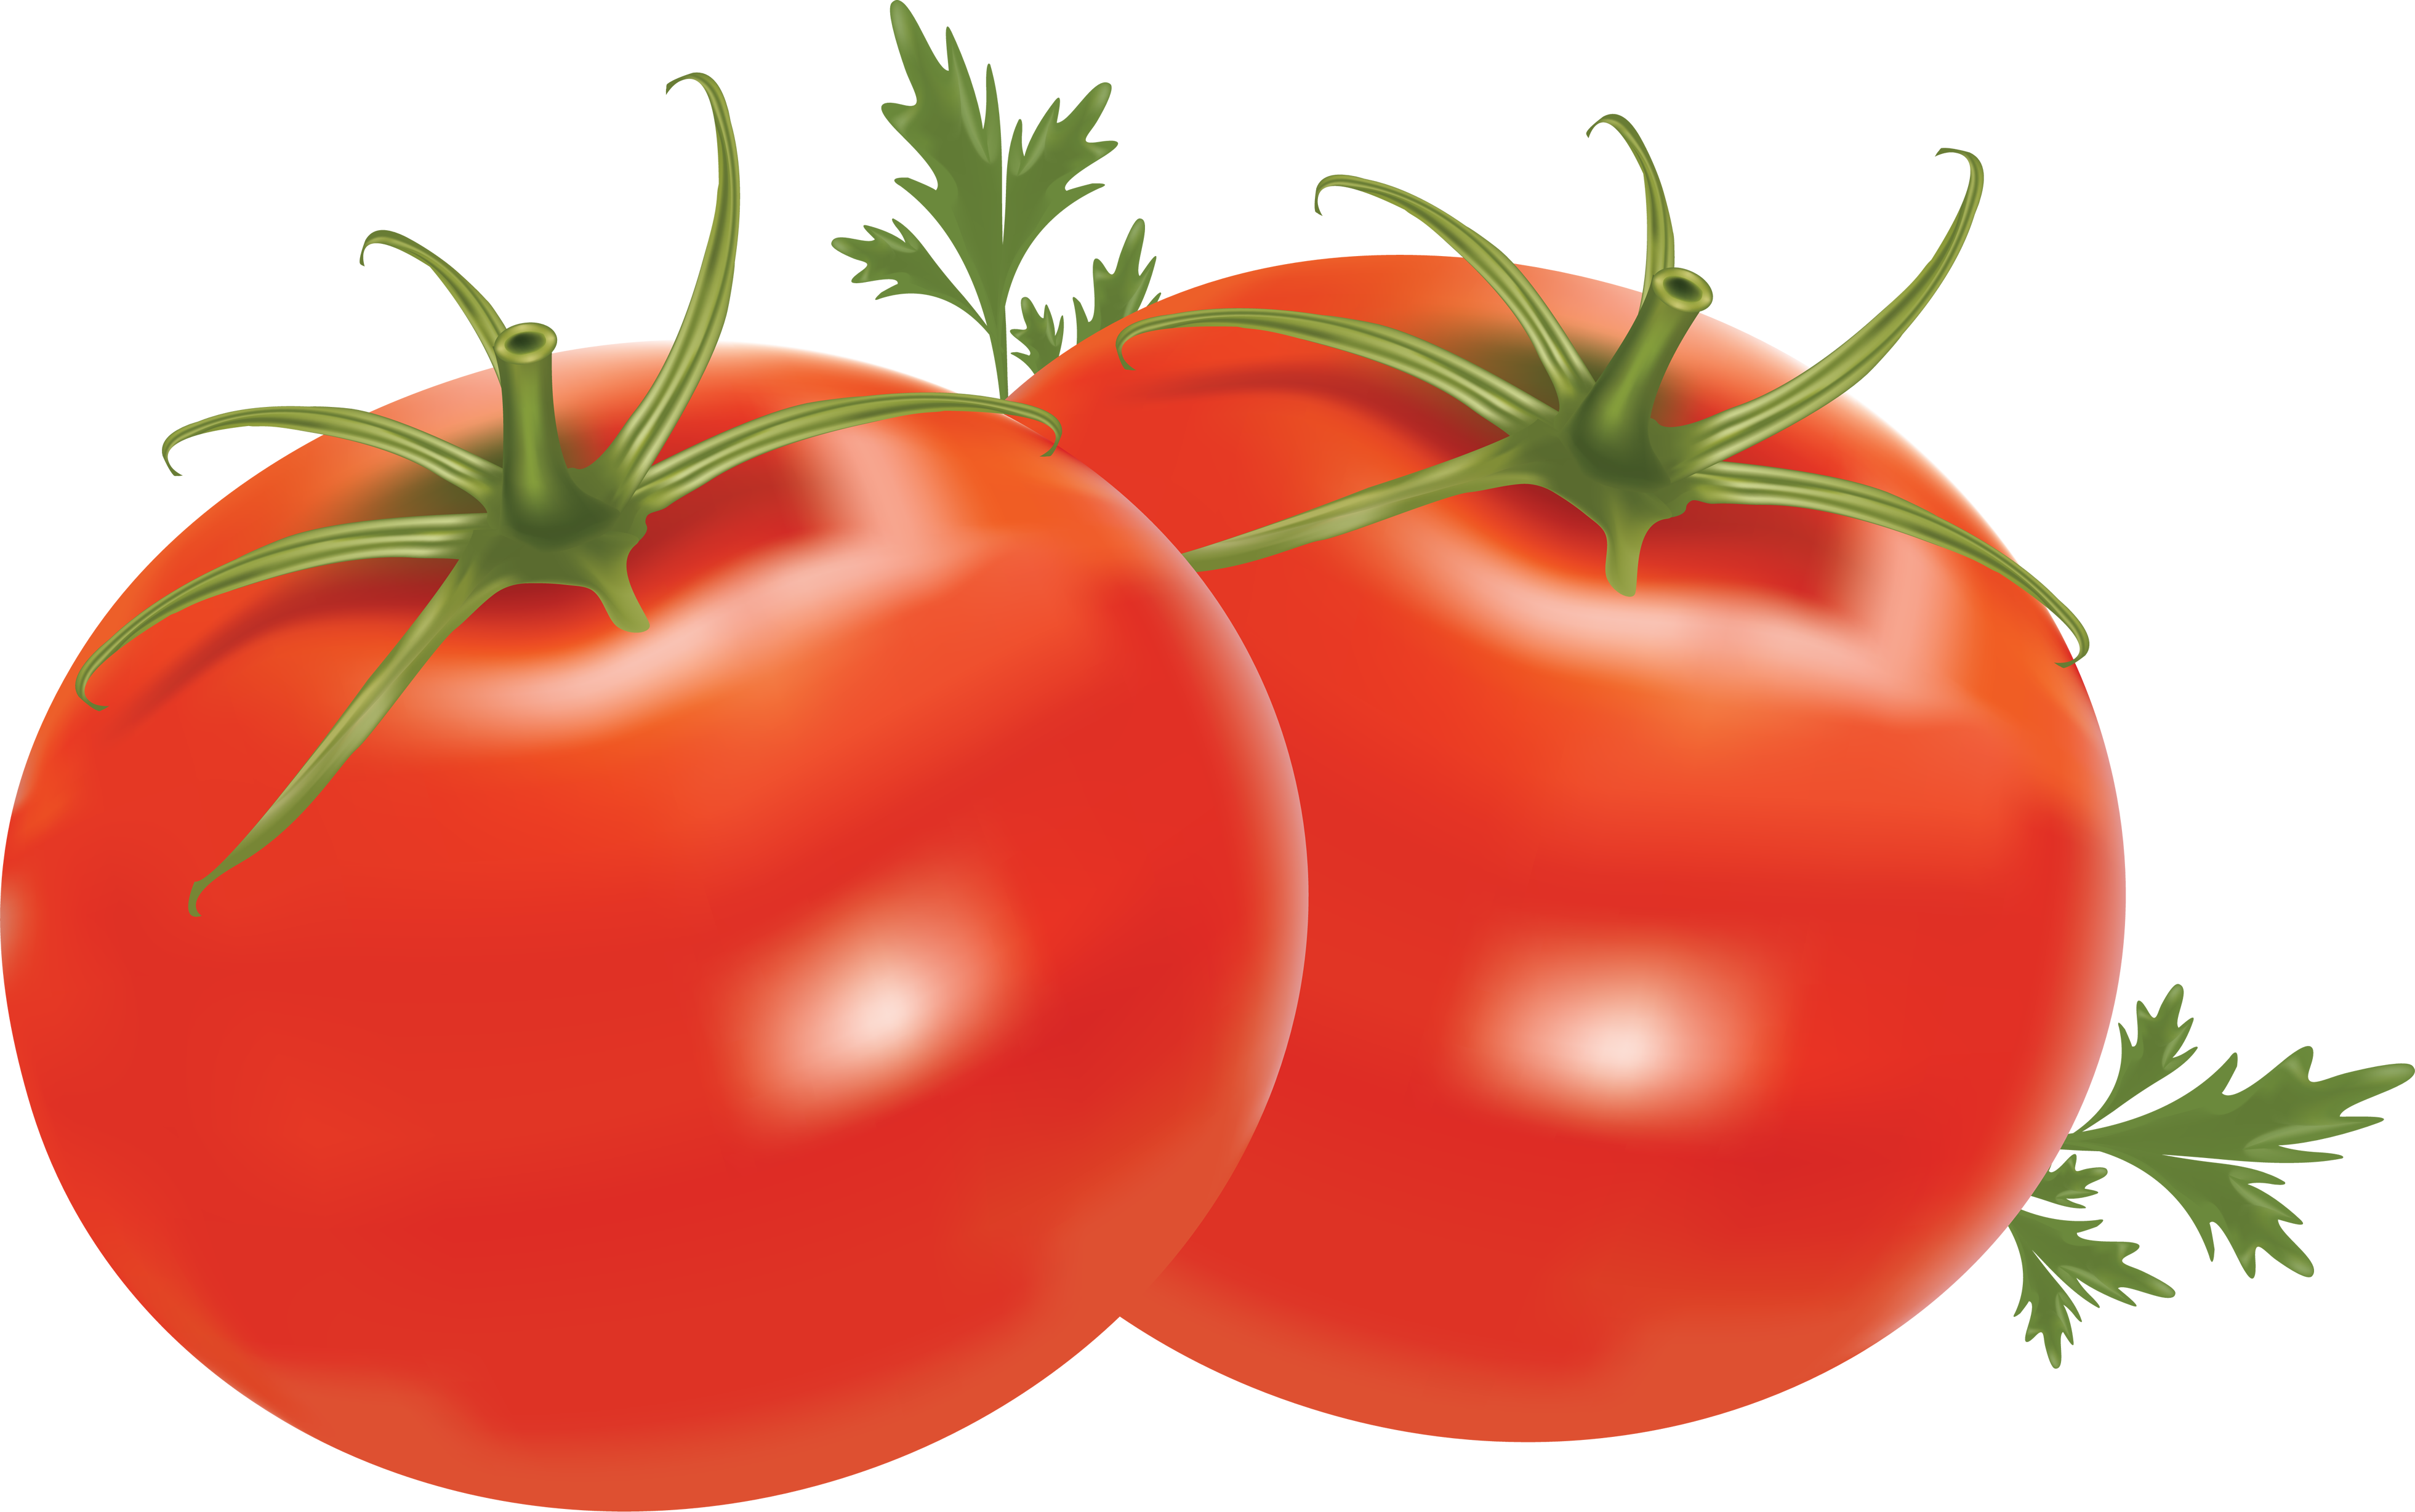 Organic Fresh Tomatoes Bunch PNG Transparent Image